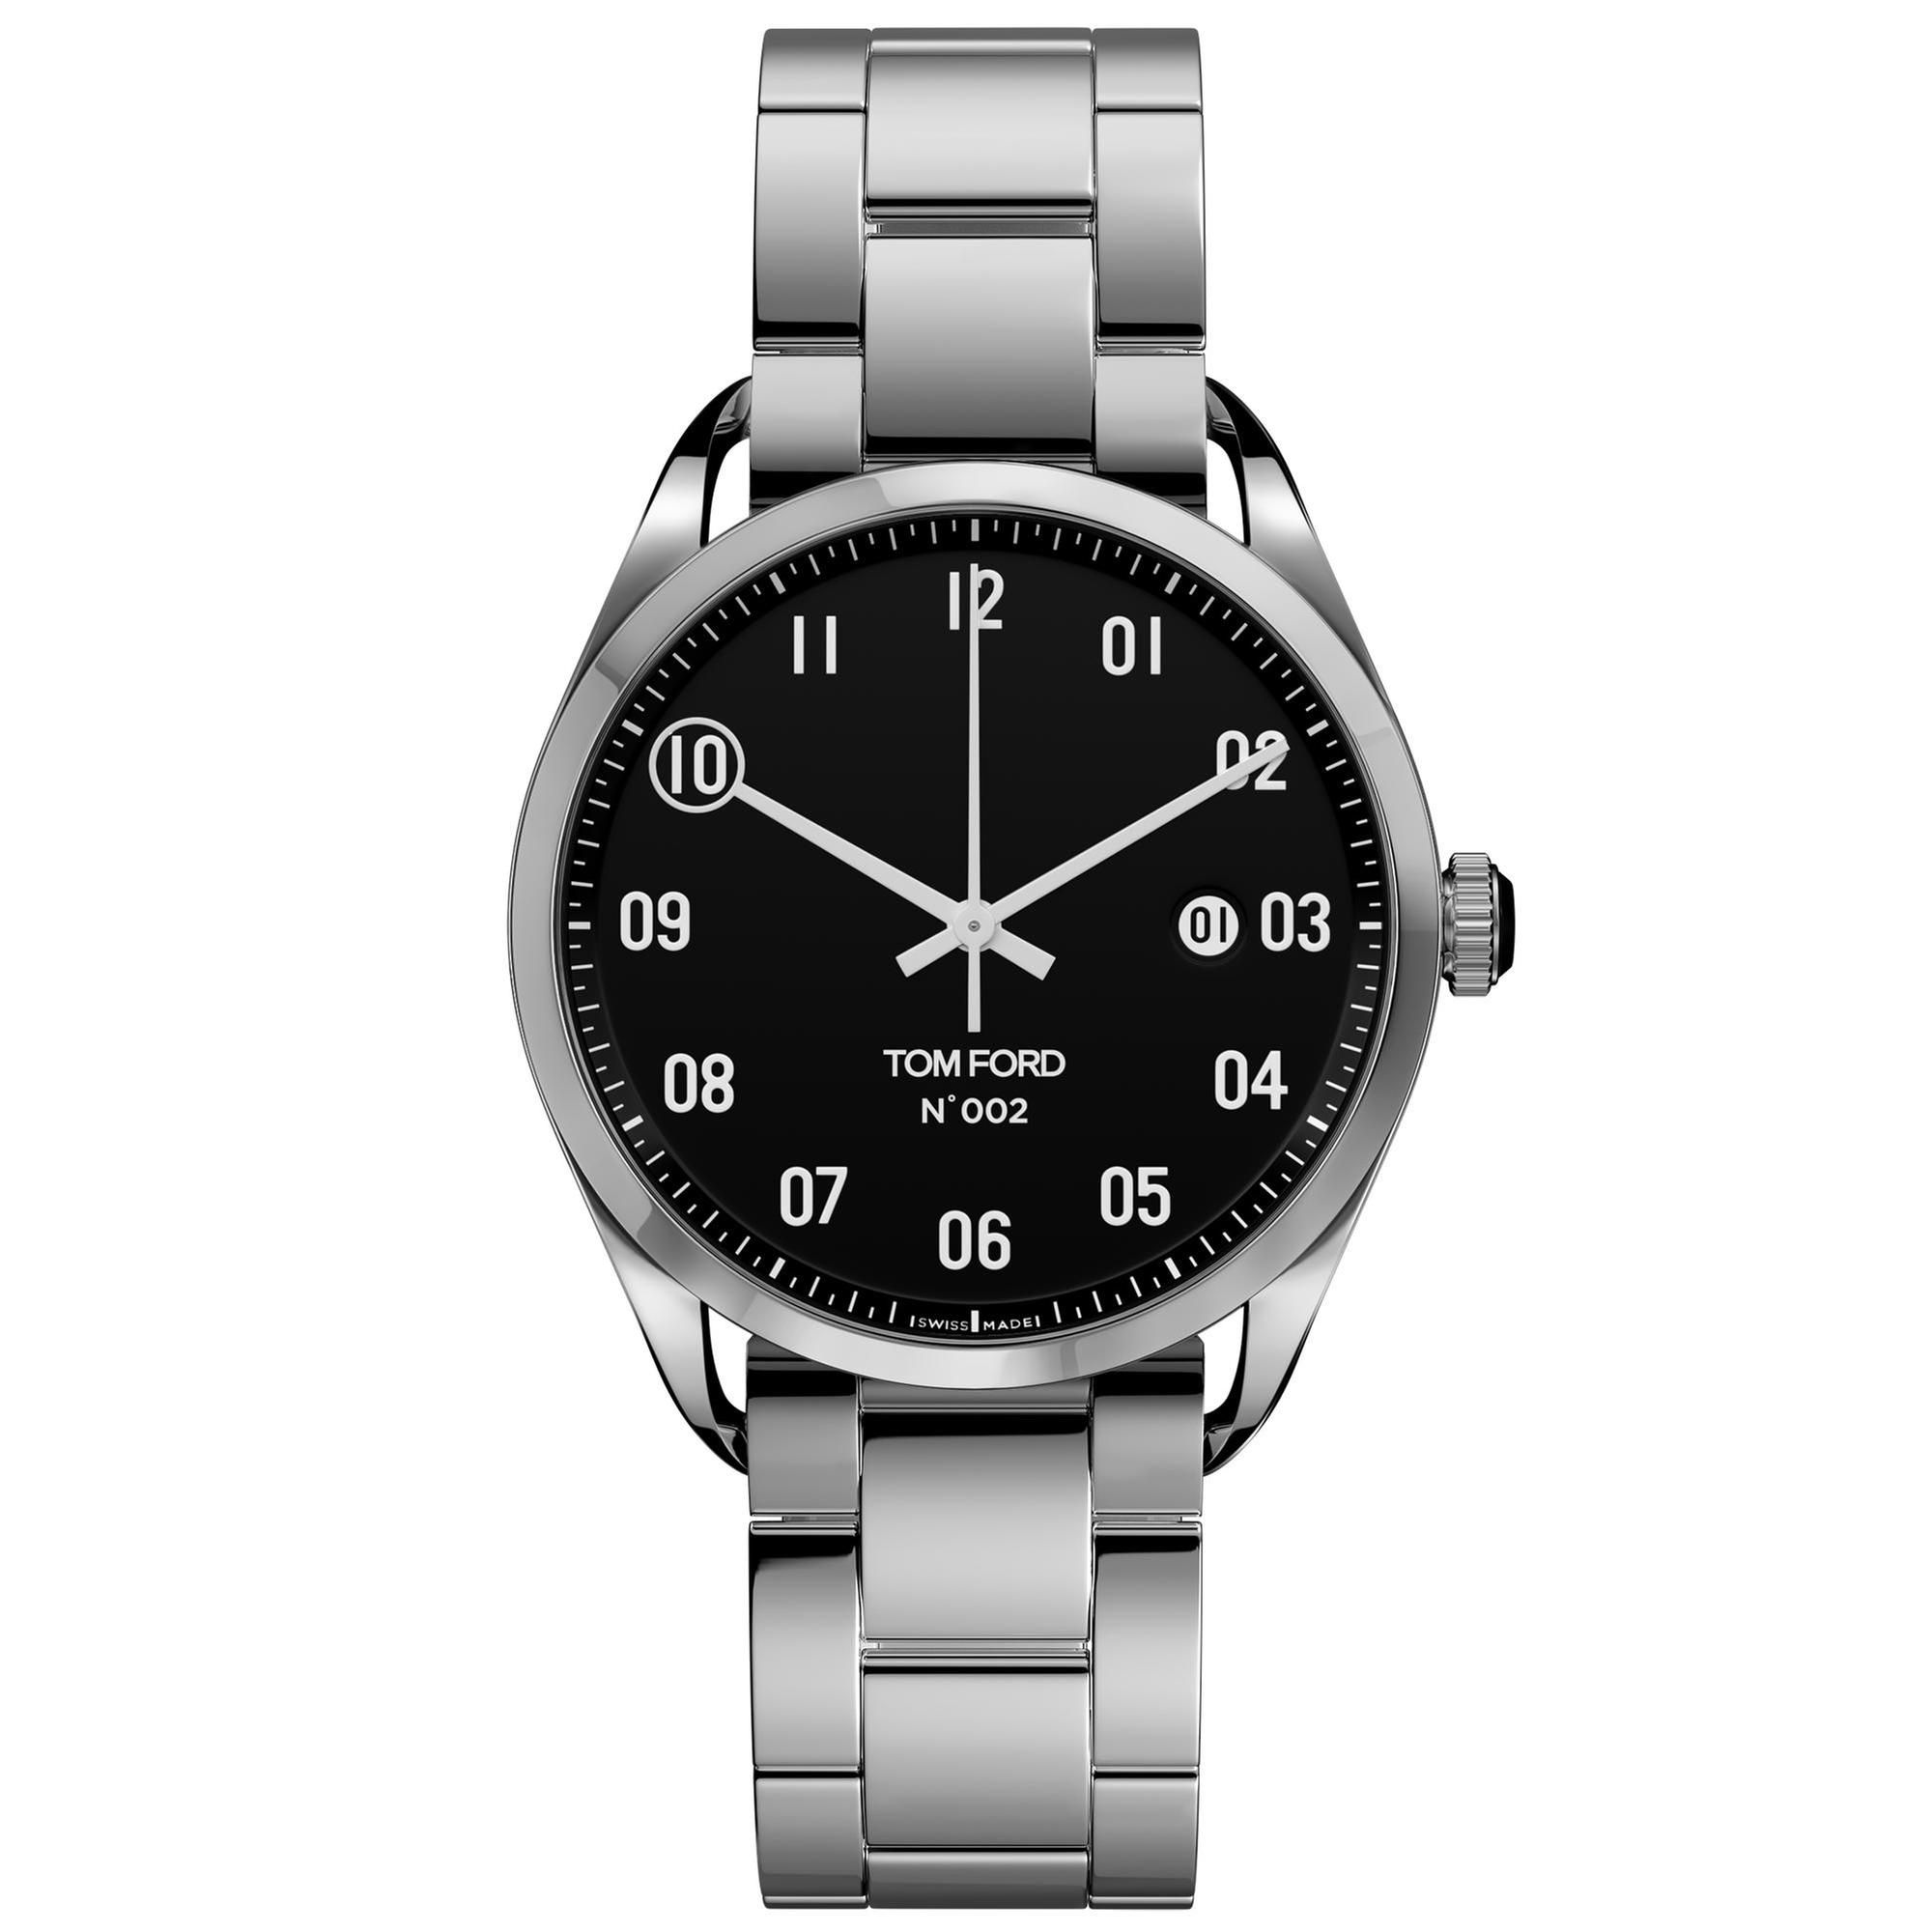 Tom Ford 002 Automatic Black Dial 40mm Watch Polished Stainless Steel Case  with Stainless Steel Strap - Youarrived